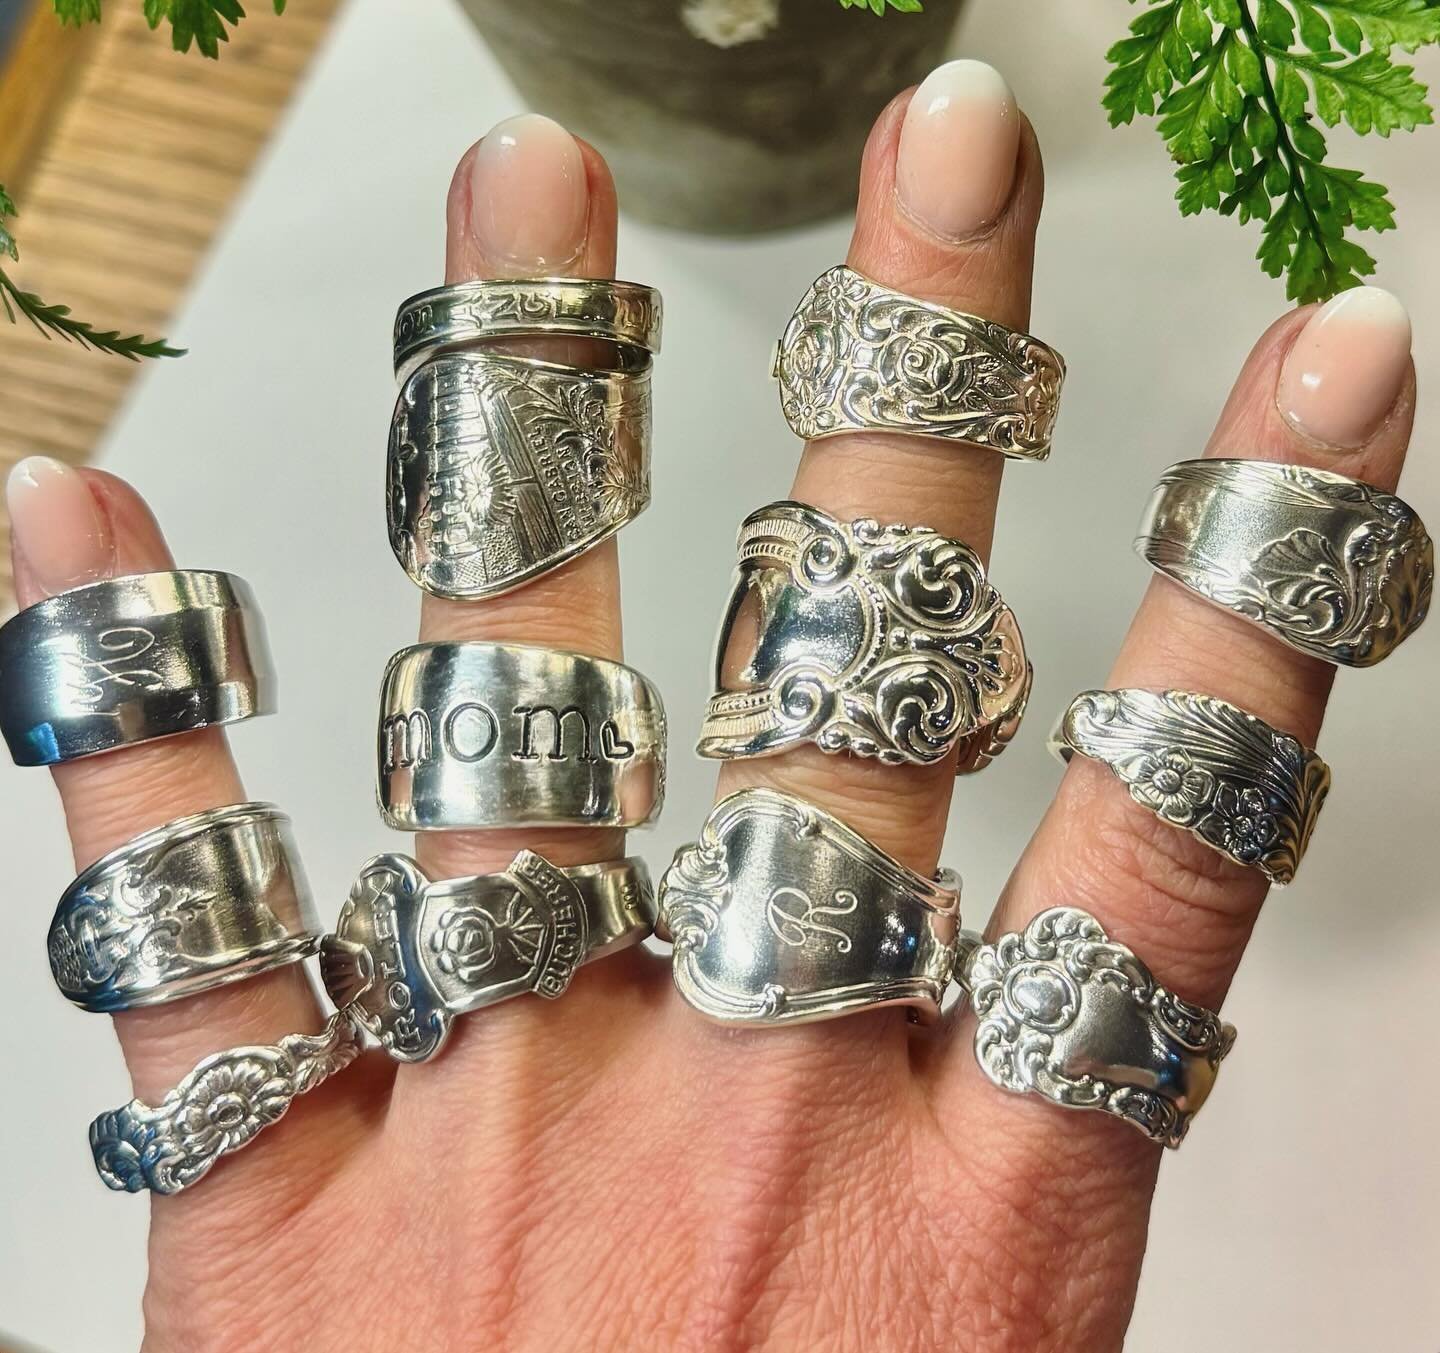 Refreshing for weekend ✌🏼 at JUNKSTOCK!

With some gorgeous new rings &amp; things&hellip;..

AND your reminder it&rsquo;s Mother&rsquo;s Day this Sunday!

#silverwearbymisty
#spoonrings
#sustainablefashion 
#havenewelrywilltravel
#junkstock
#vintag